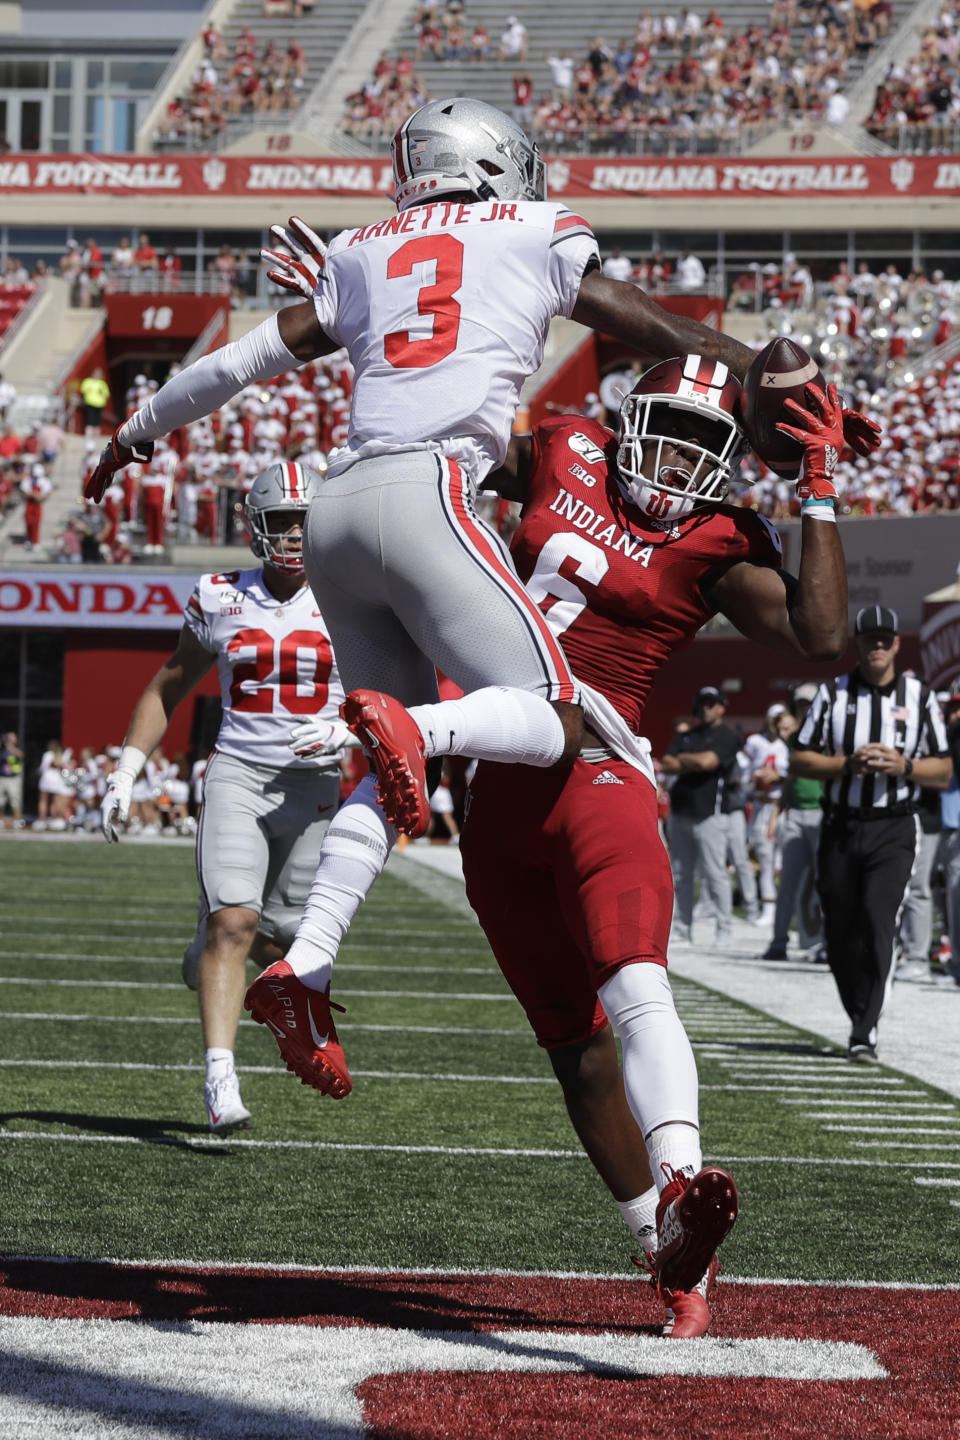 Ohio State cornerback Damon Arnette (3) breaks up a pass intended for Indiana wide receiver Donavan Hale (6) during the first half of an NCAA college football game, Saturday, Sept. 14, 2019, in Bloomington, Ind. (AP Photo/Darron Cummings)